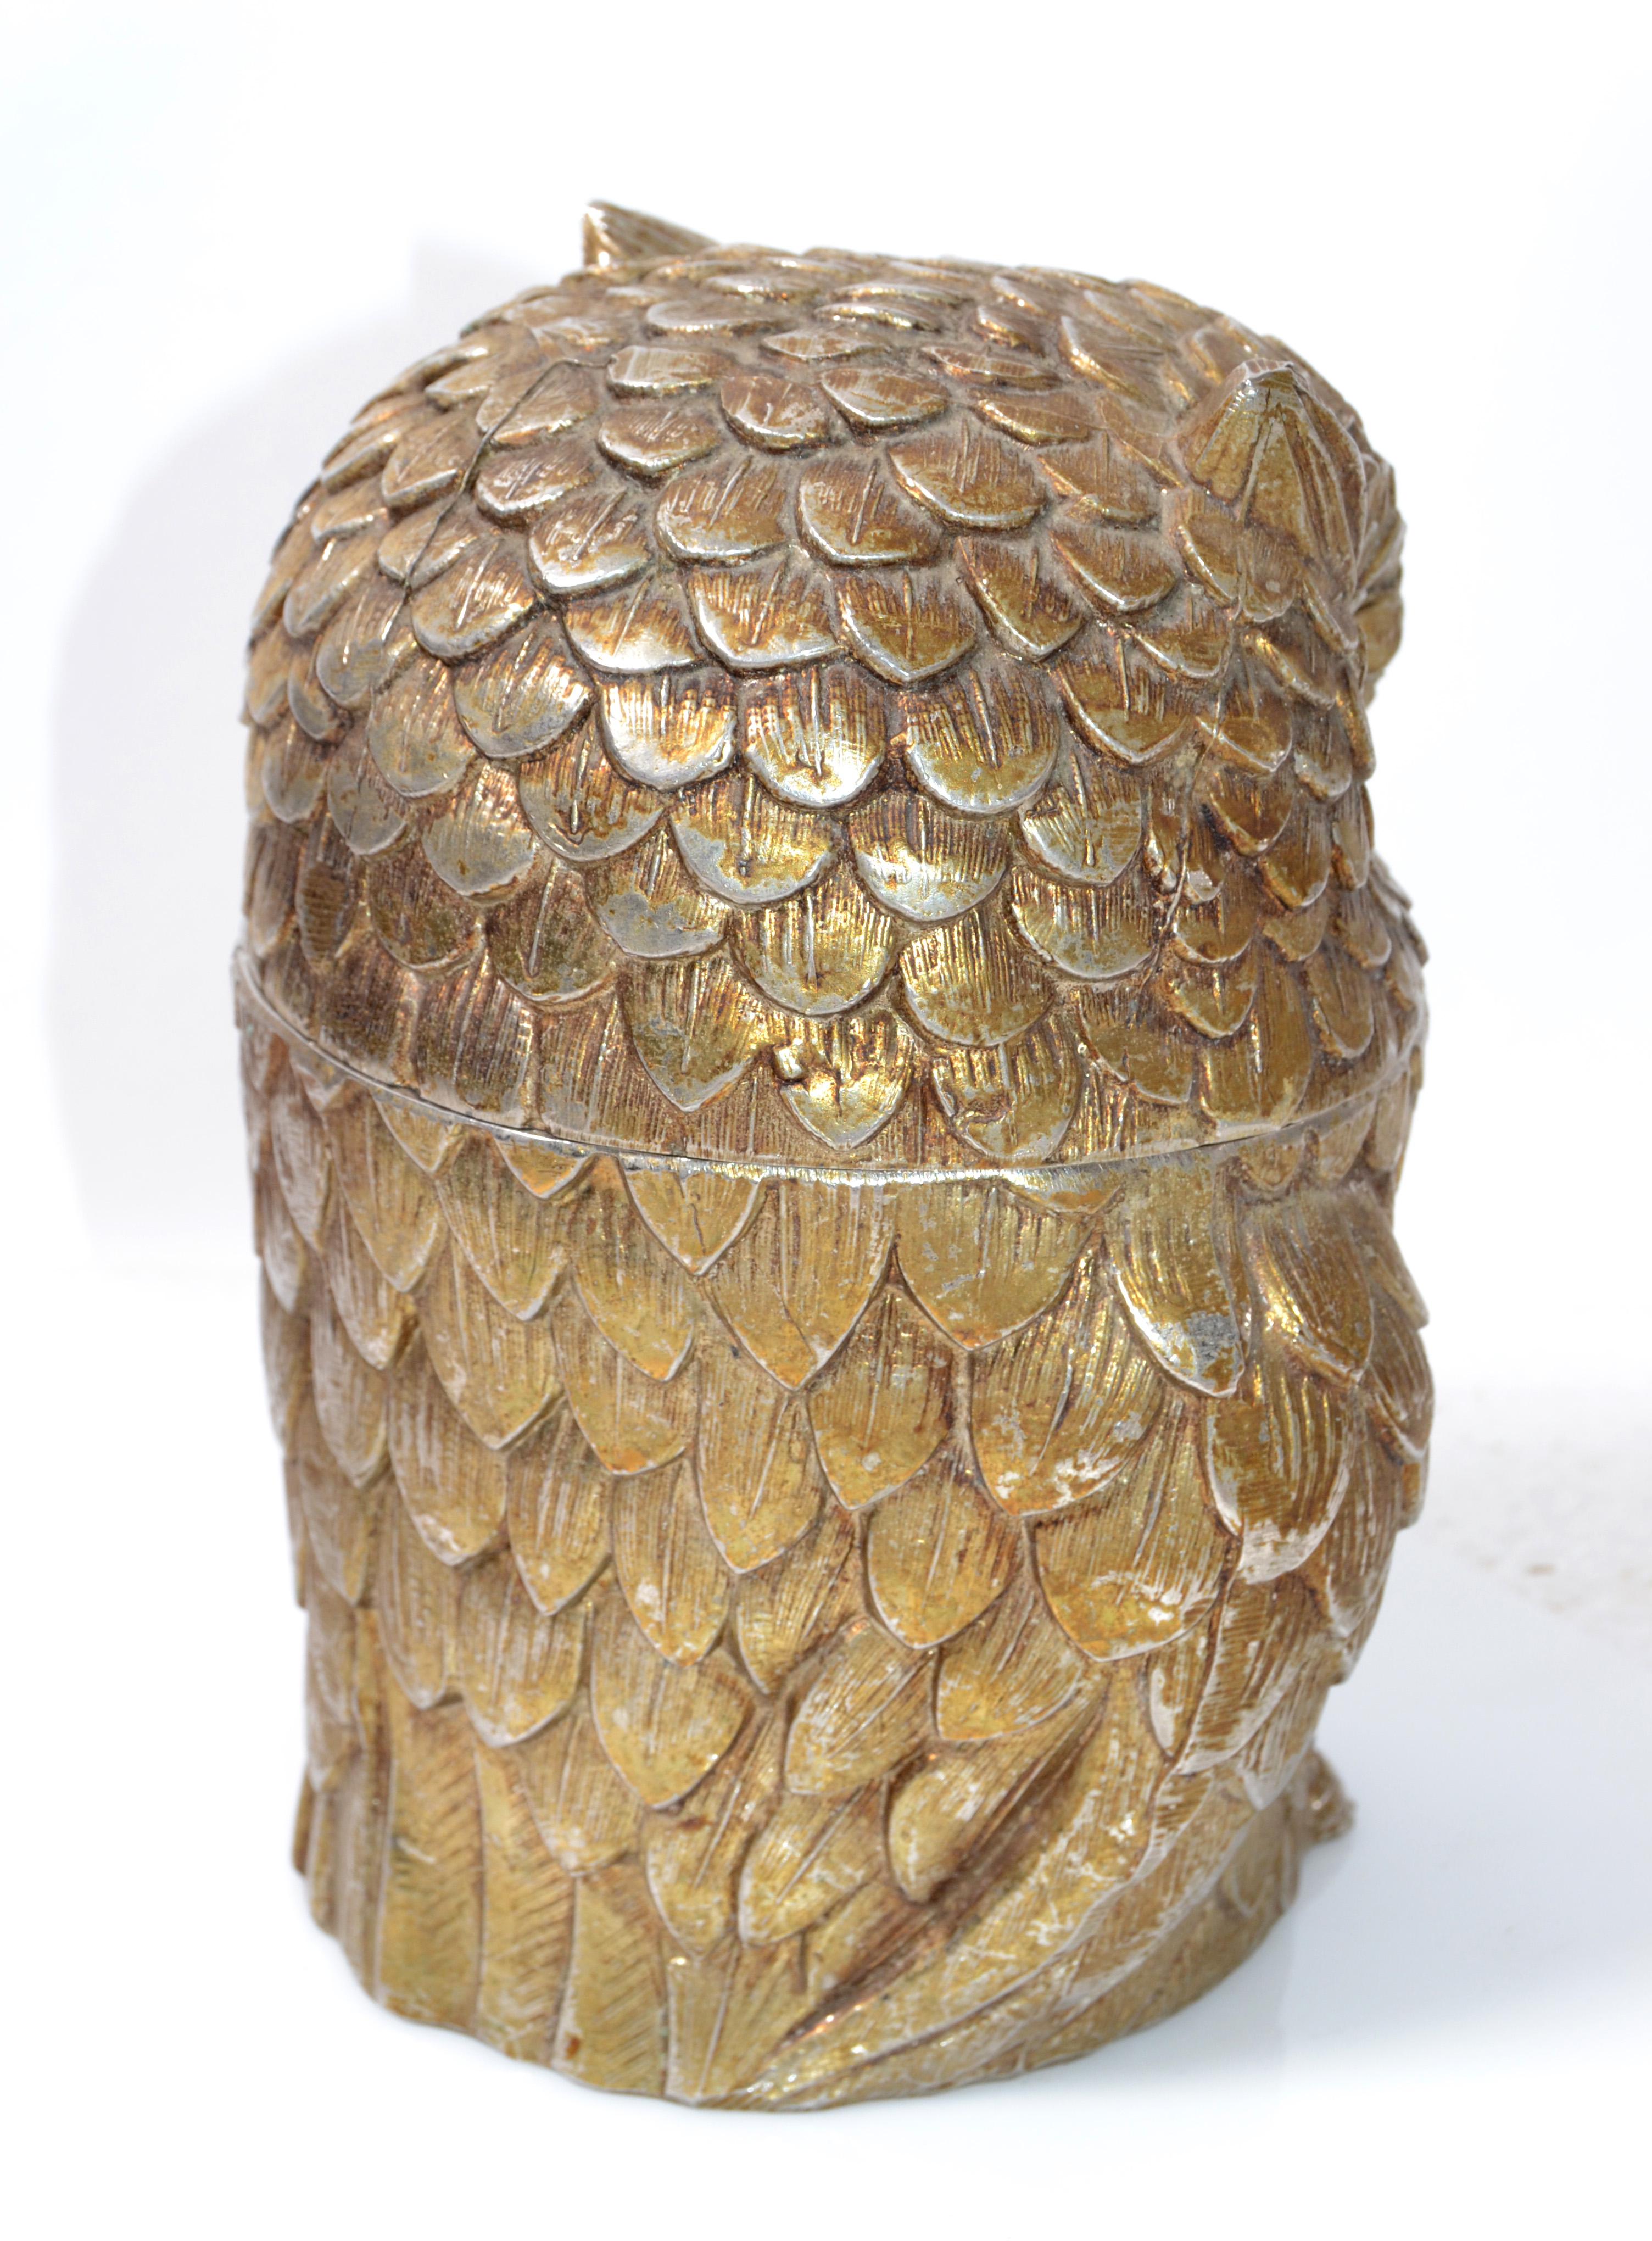 Owl Mauro Manetti Gold Plate & Insulated Ice Bucket Mid-Century Modern, Italy For Sale 3